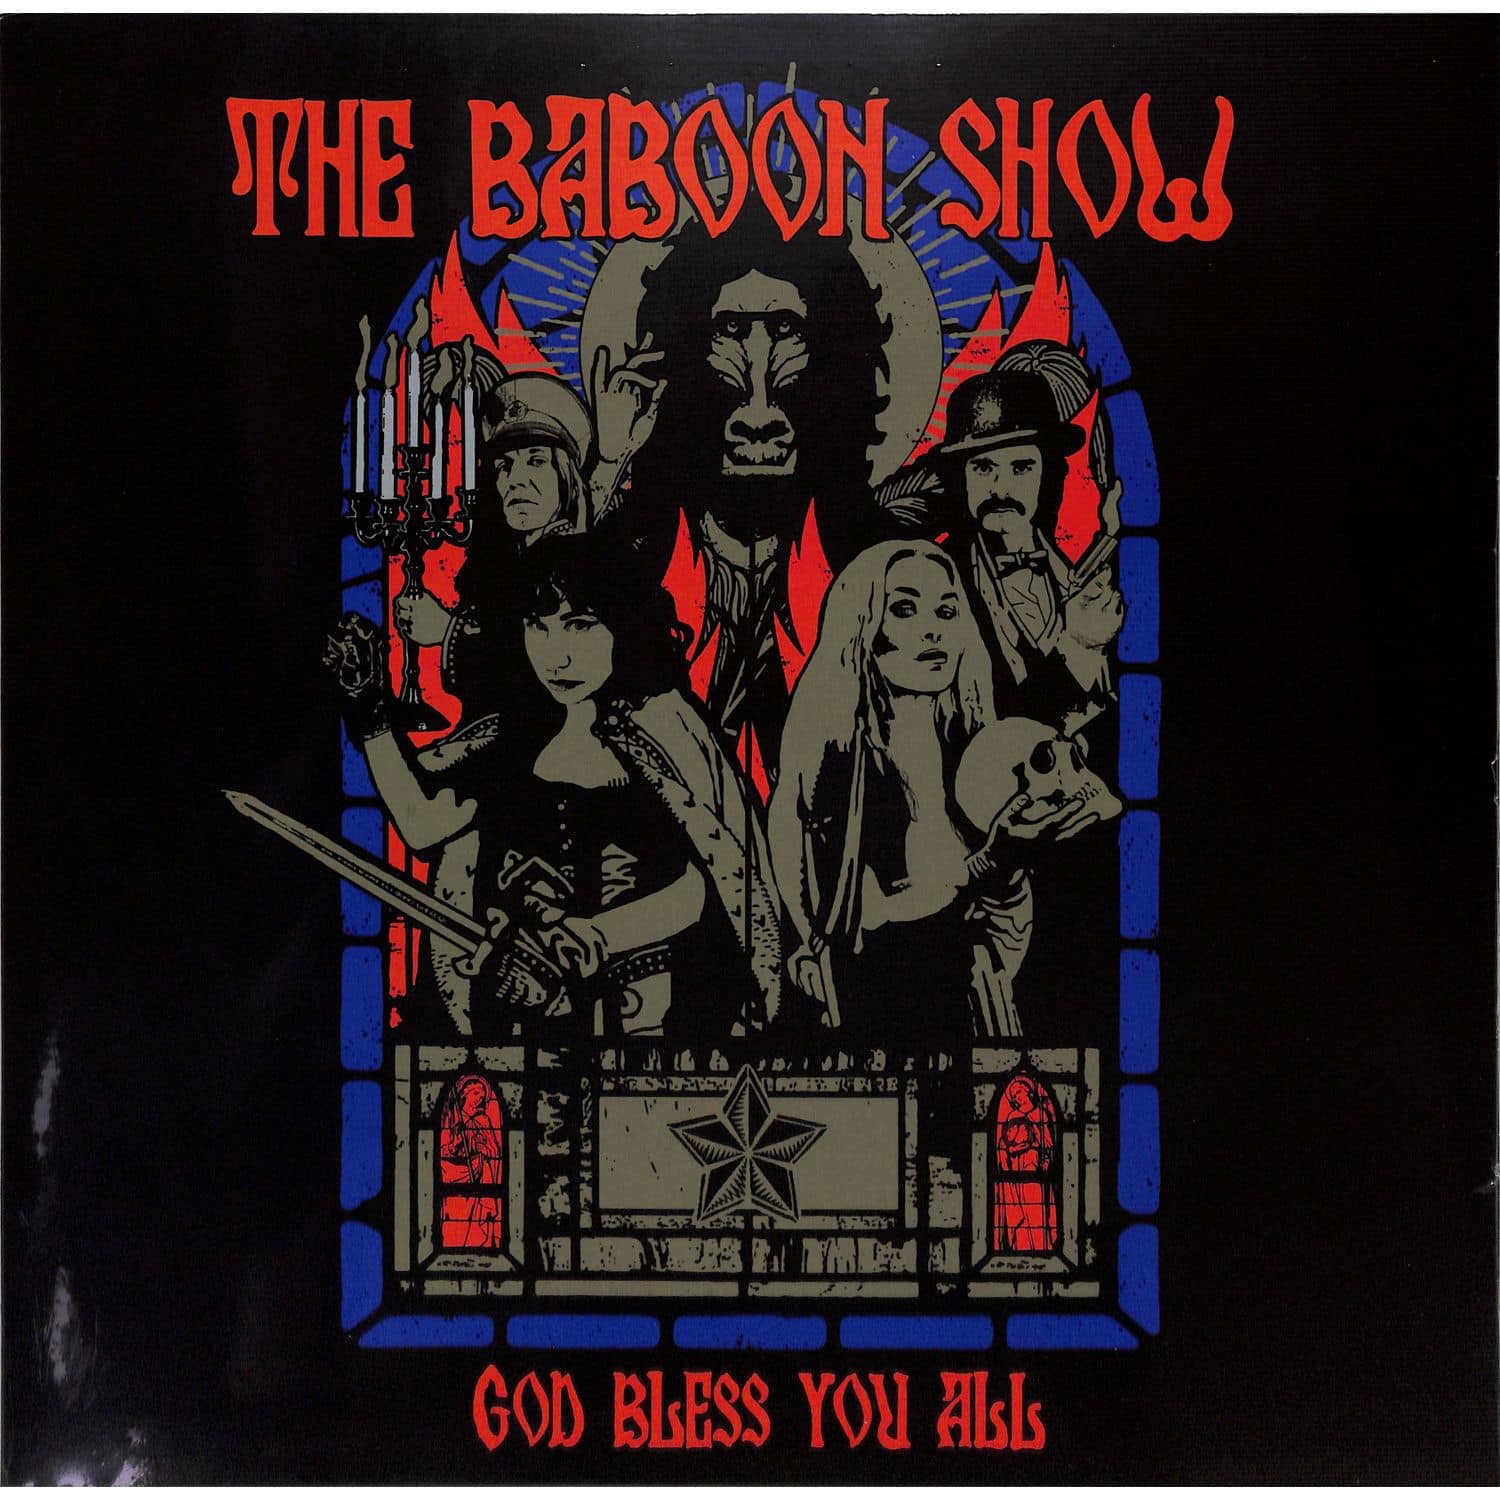  The Baboon Show - GOD BLESS YOU ALL 